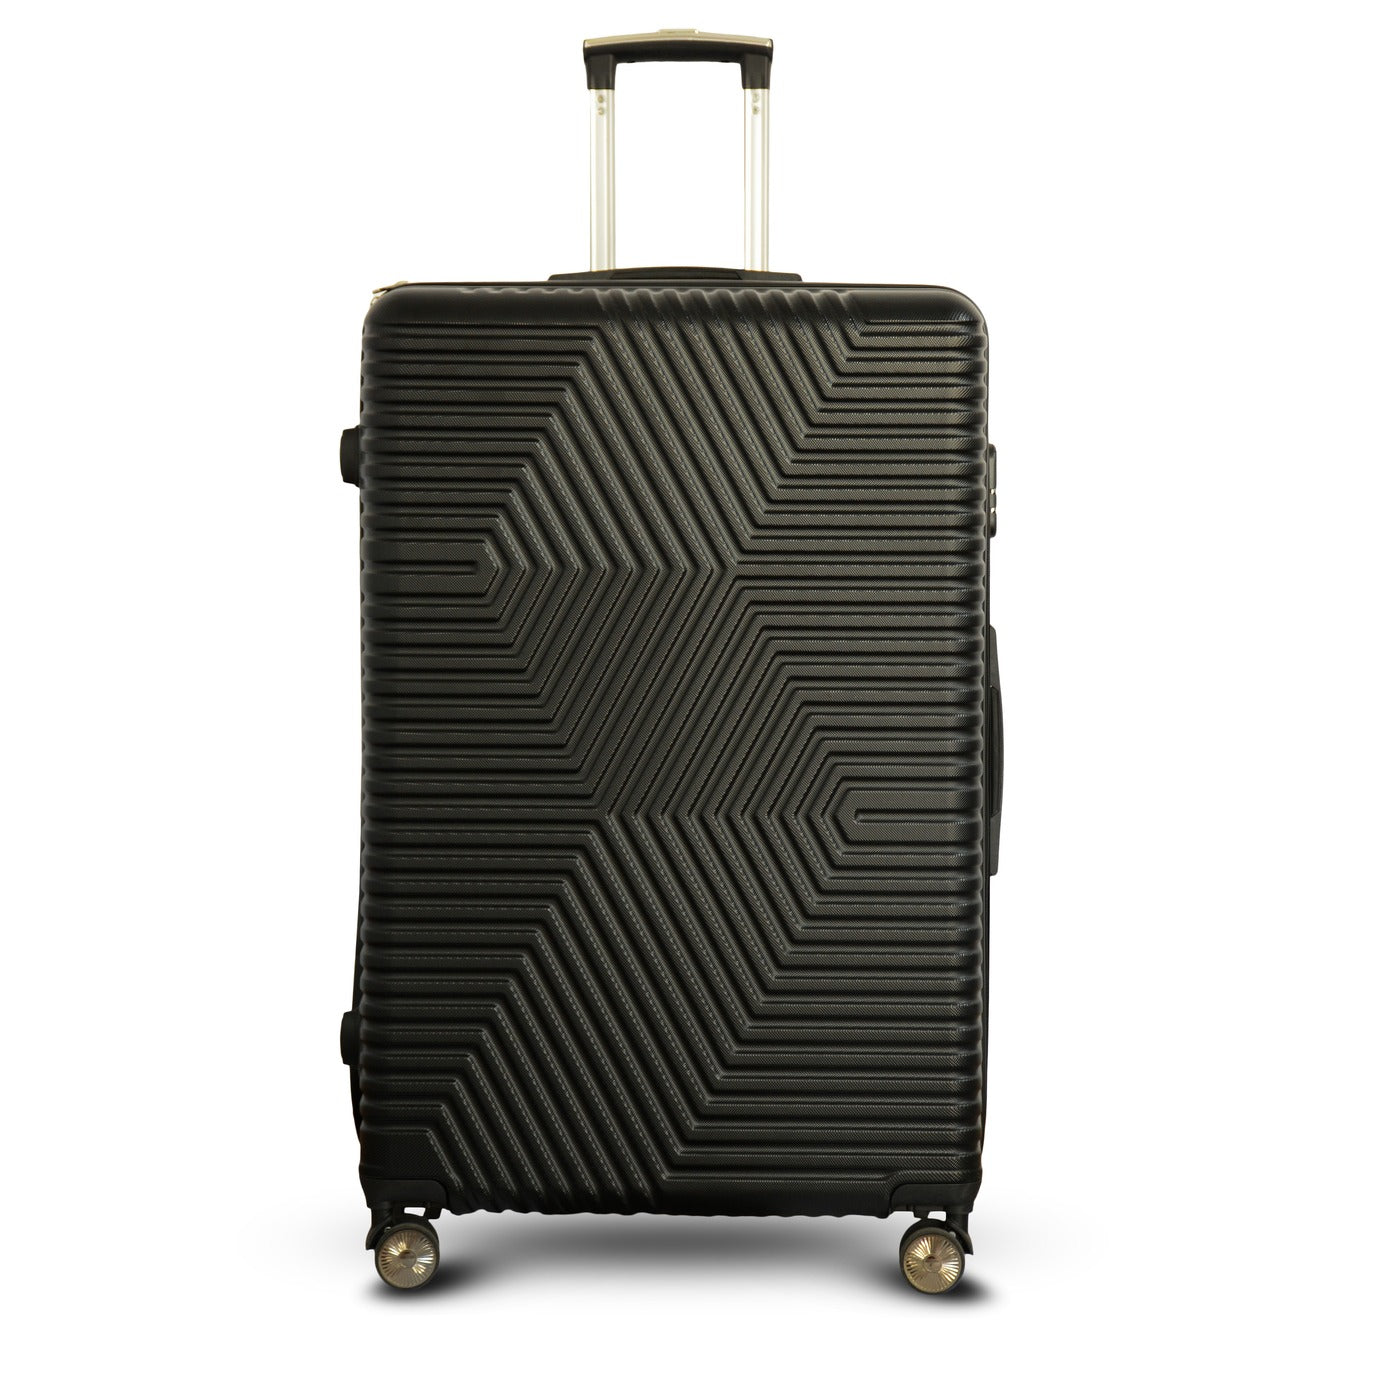 28" Zig Zag ABS Lightweight Luggage Bag With Double Spinner Wheel